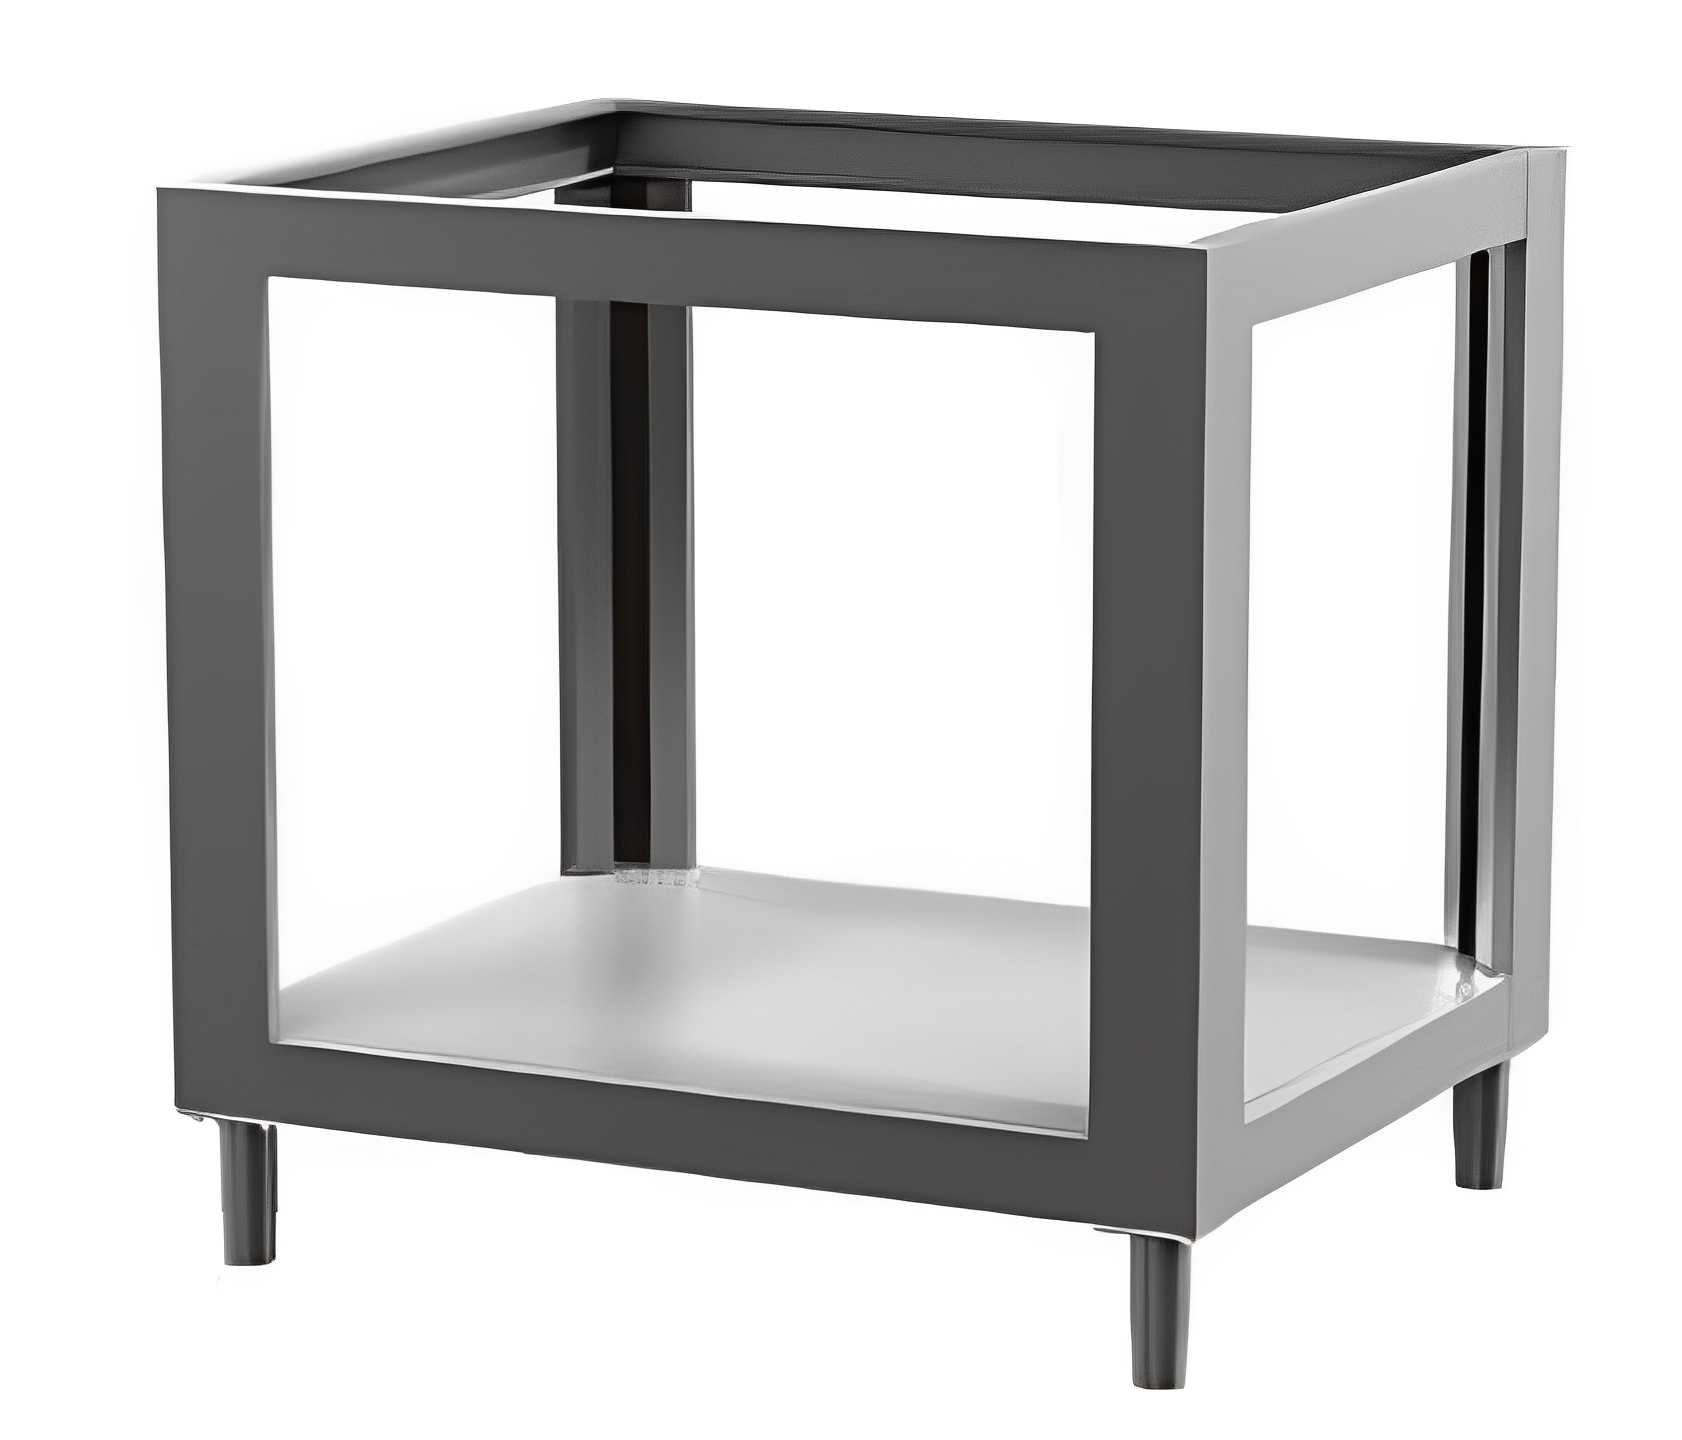 PIZZAGROUP S6L+6L Stands in stainless steel, with service shelf.